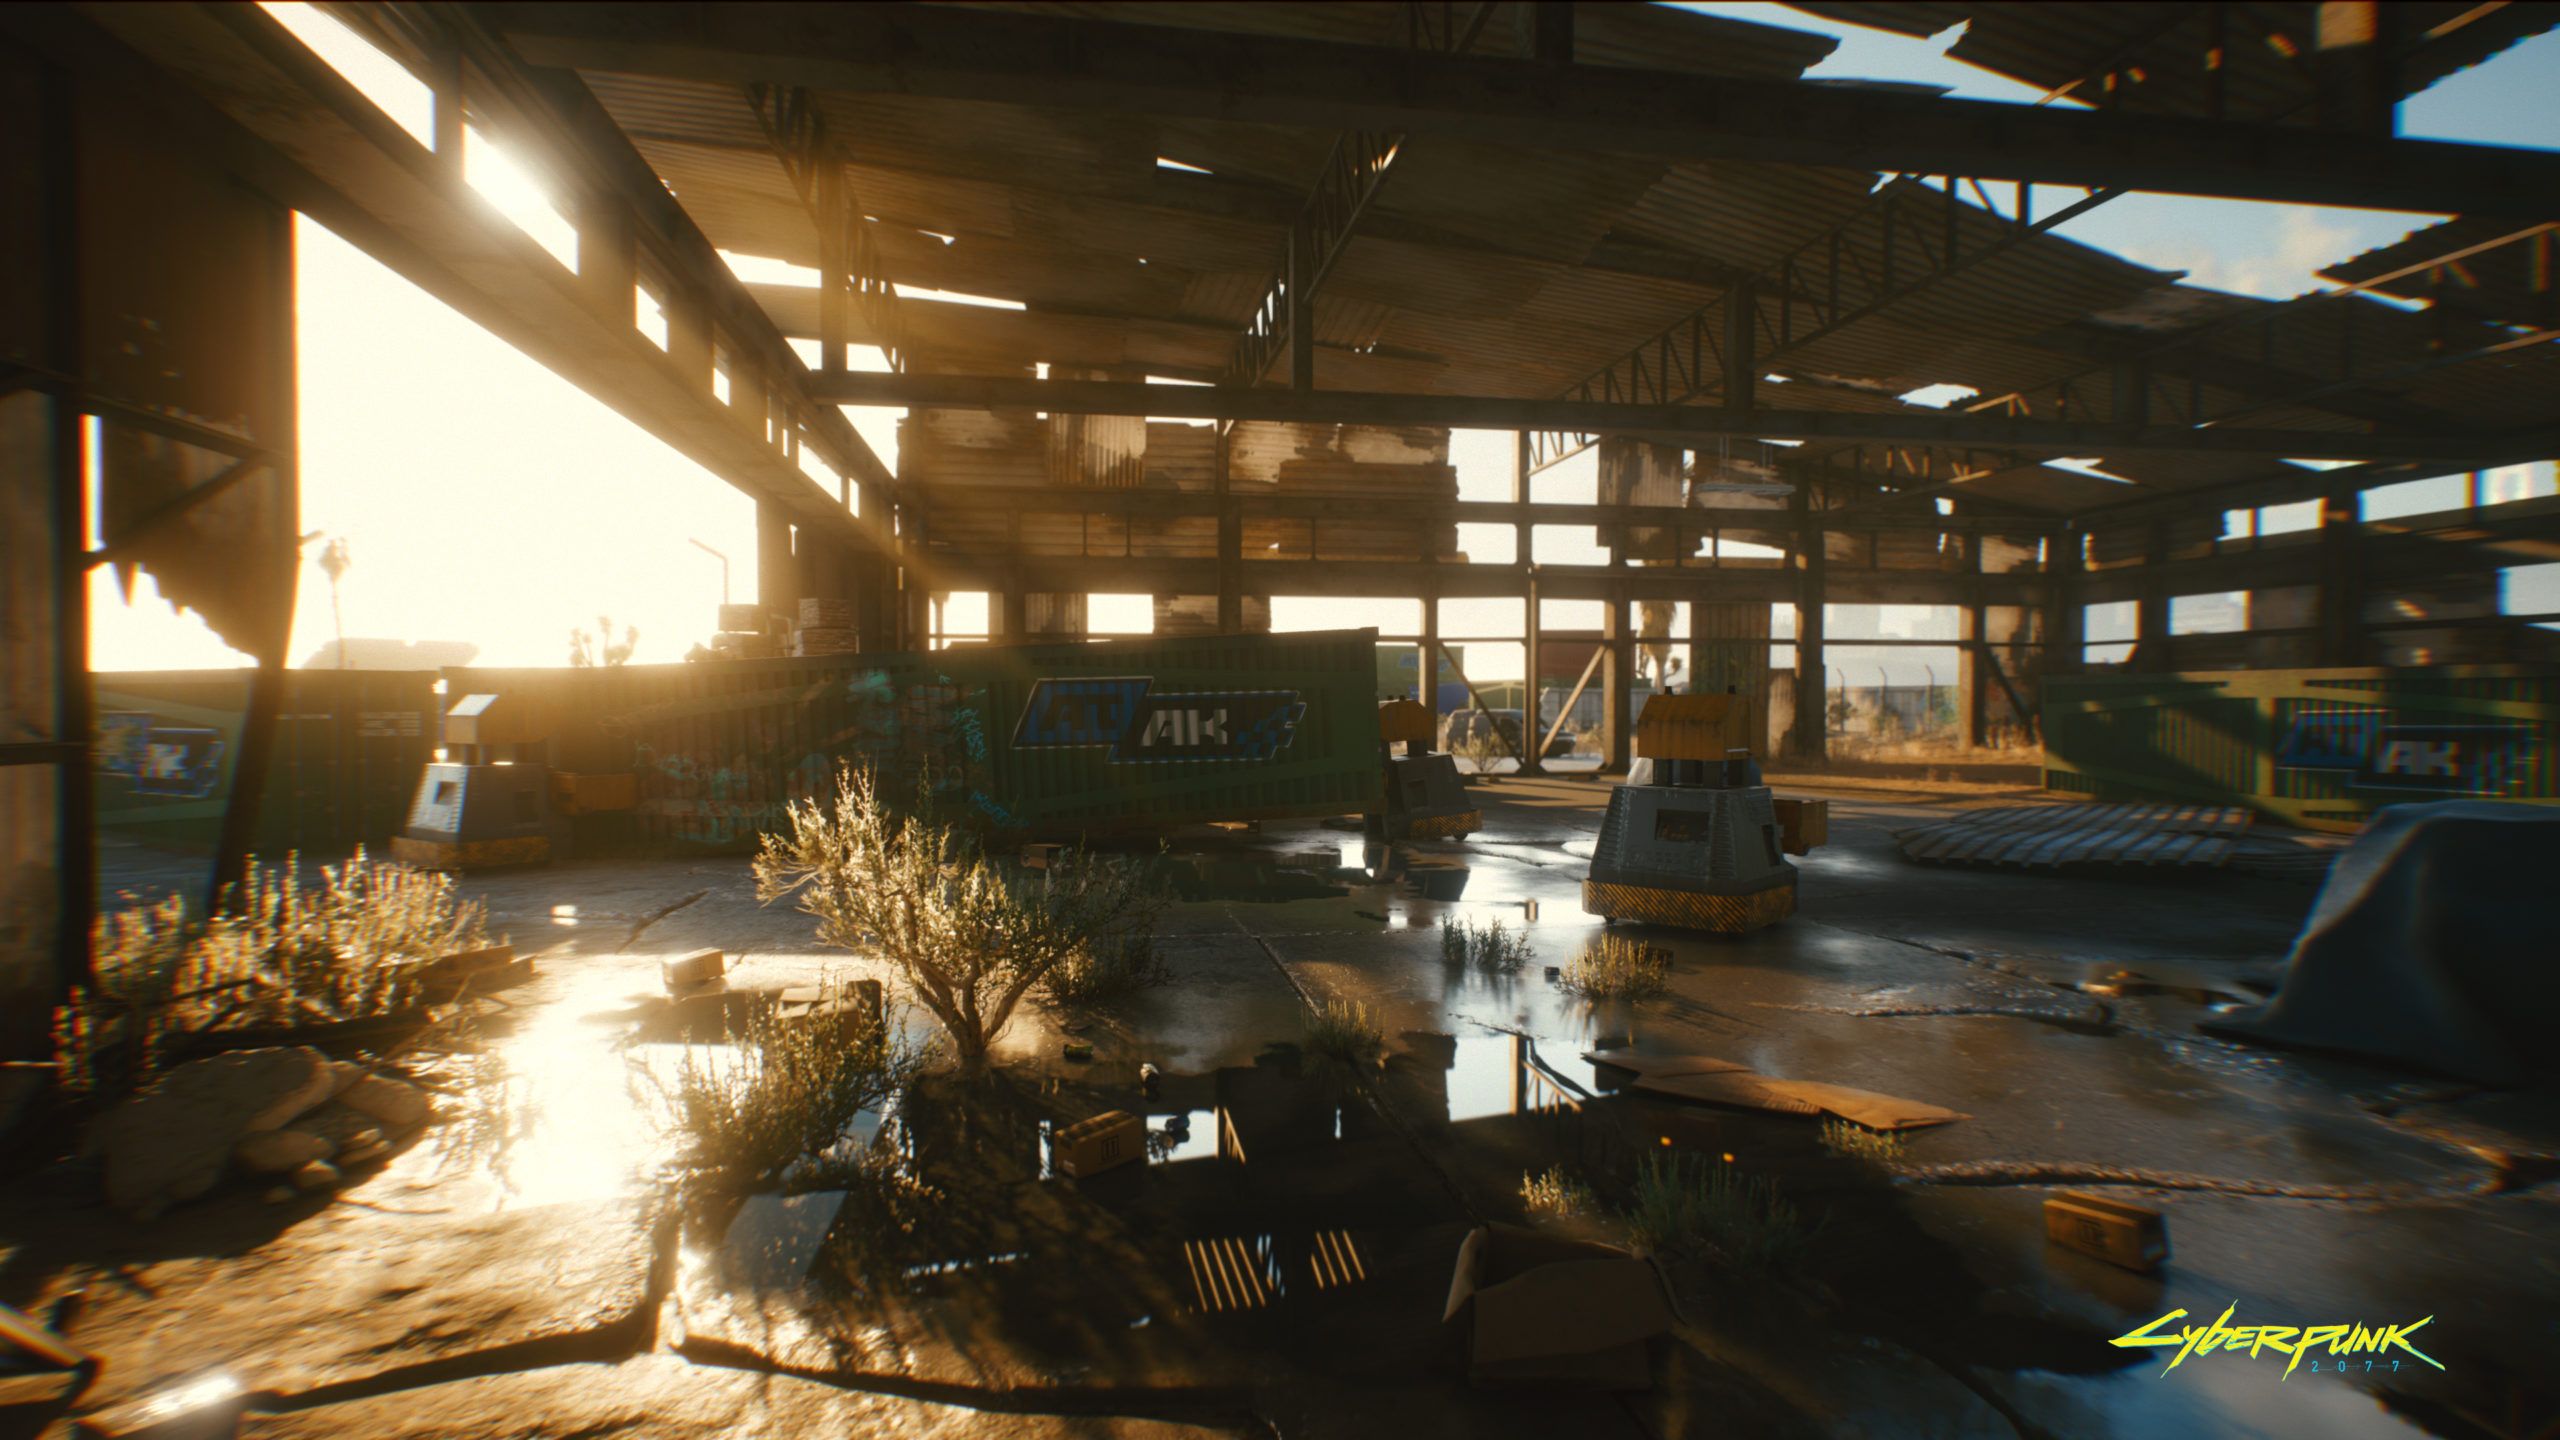 Cyberpunk 2077 to Feature Ray Tracing and NVIDIA DLSS 2.0 at